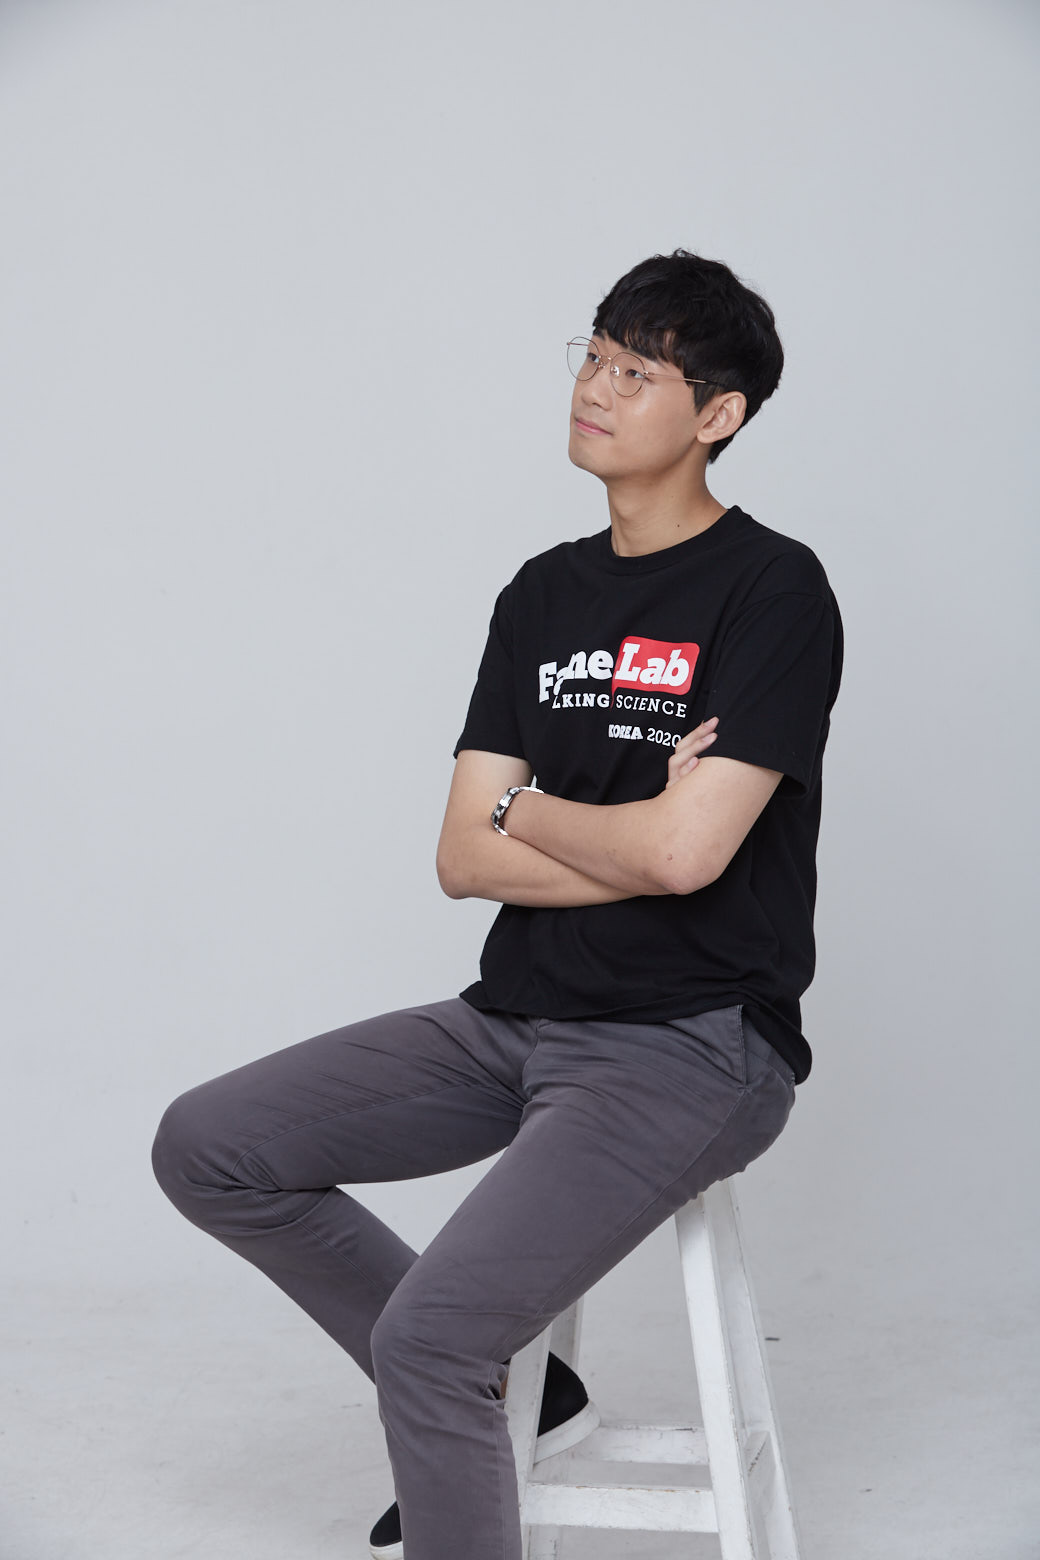 GIST College student Byung-jin Kim advances to the 2020 FameLab Korea finals (Top 10) 이미지